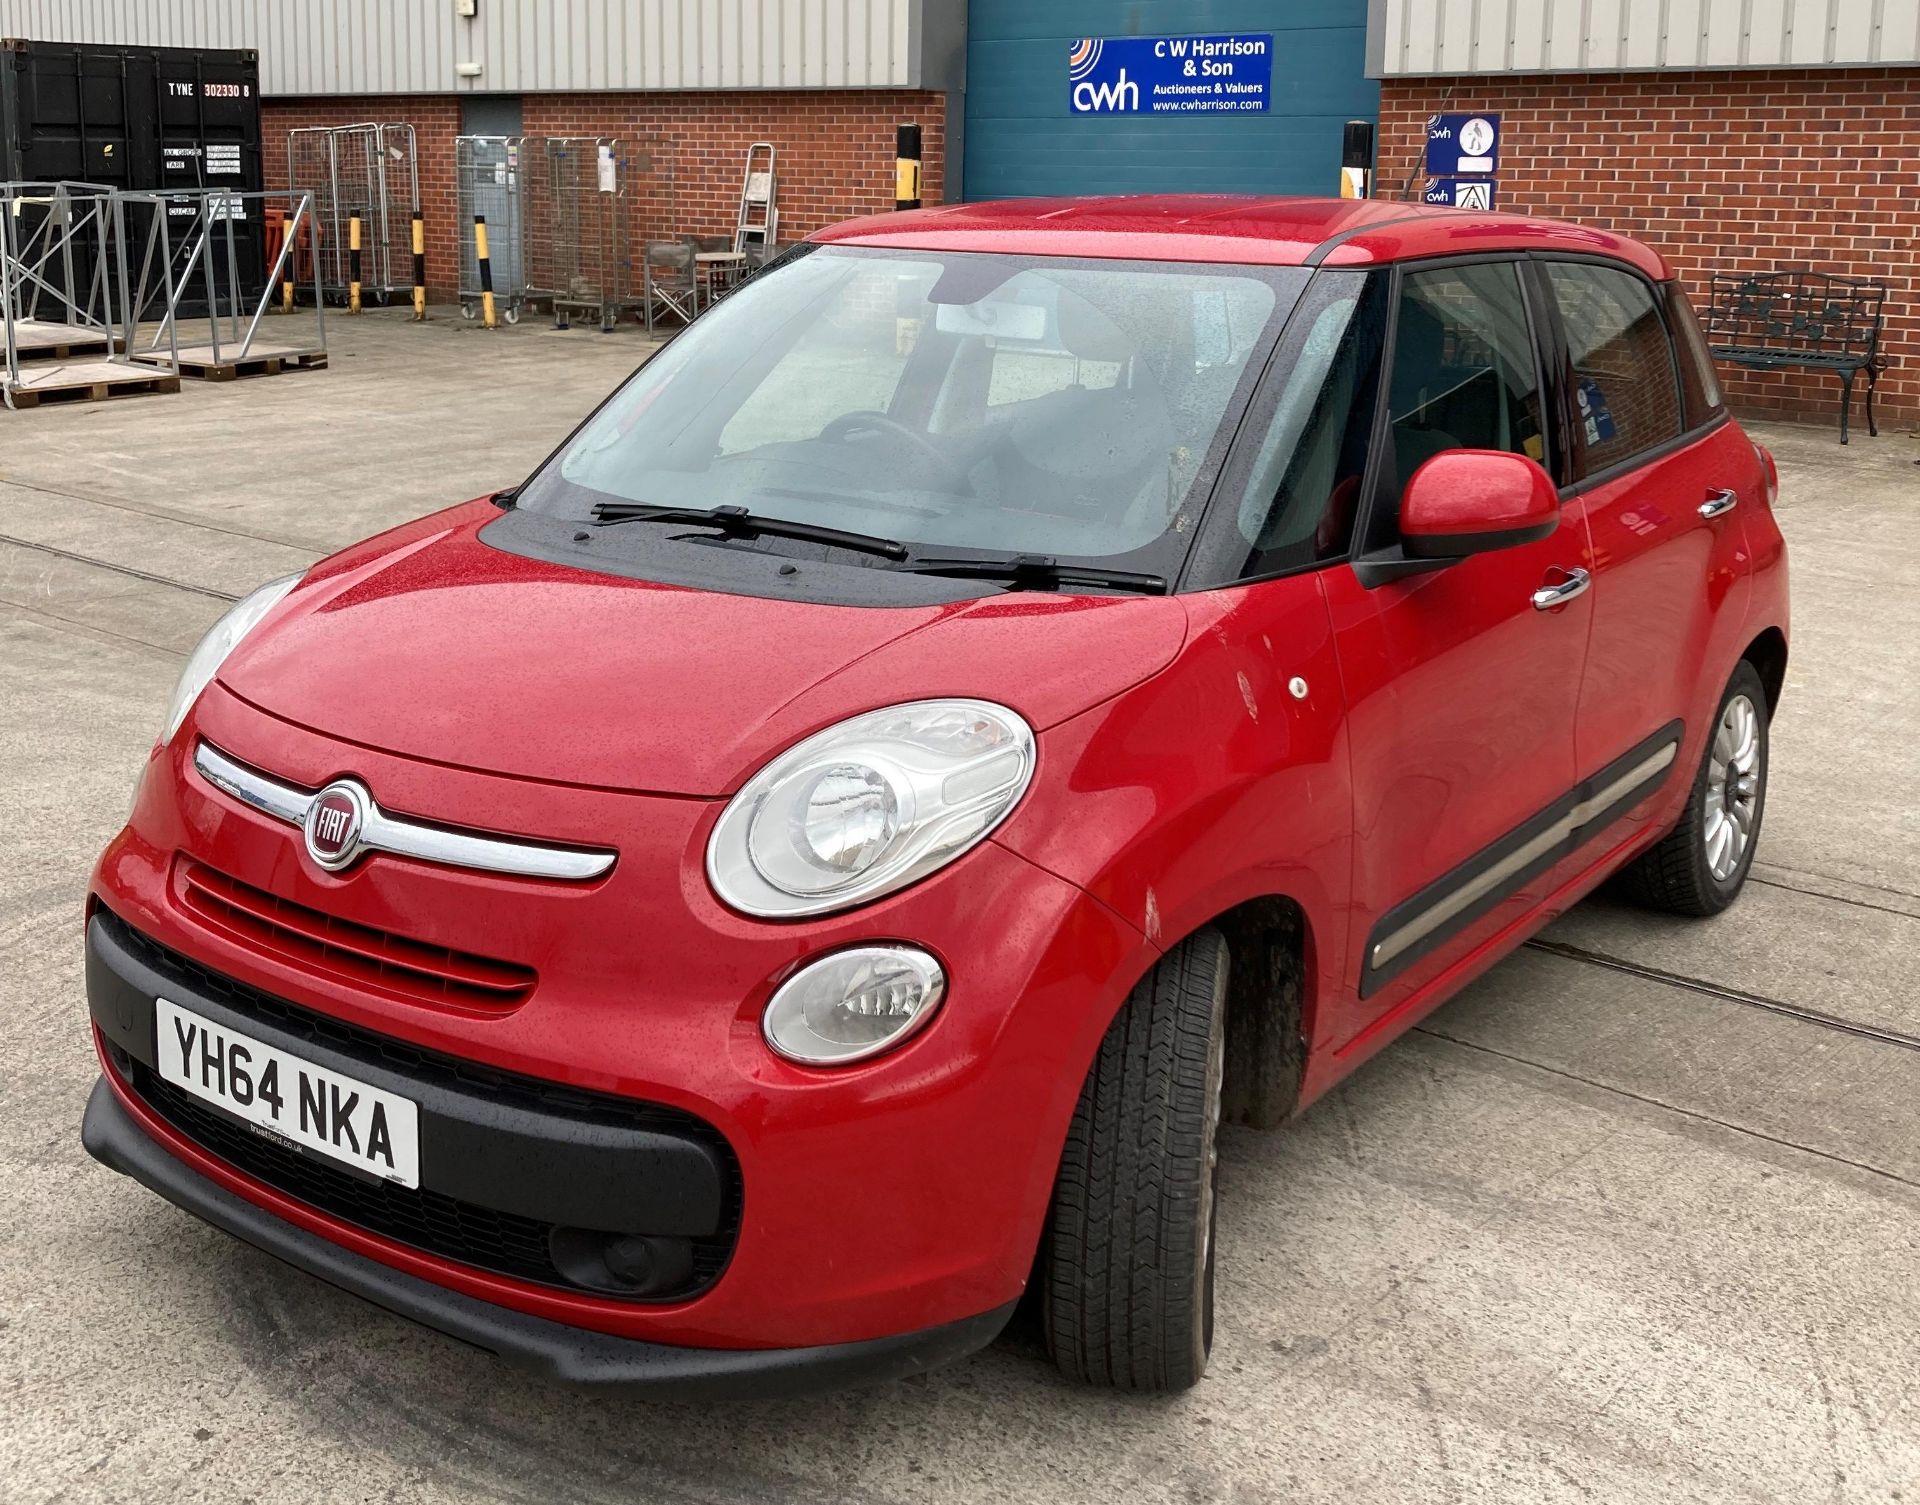 FIAT 500L POP STAR MULTI-JET 1.2 MPV - DIESEL - RED. On the instructions of: A retained client. - Image 8 of 16